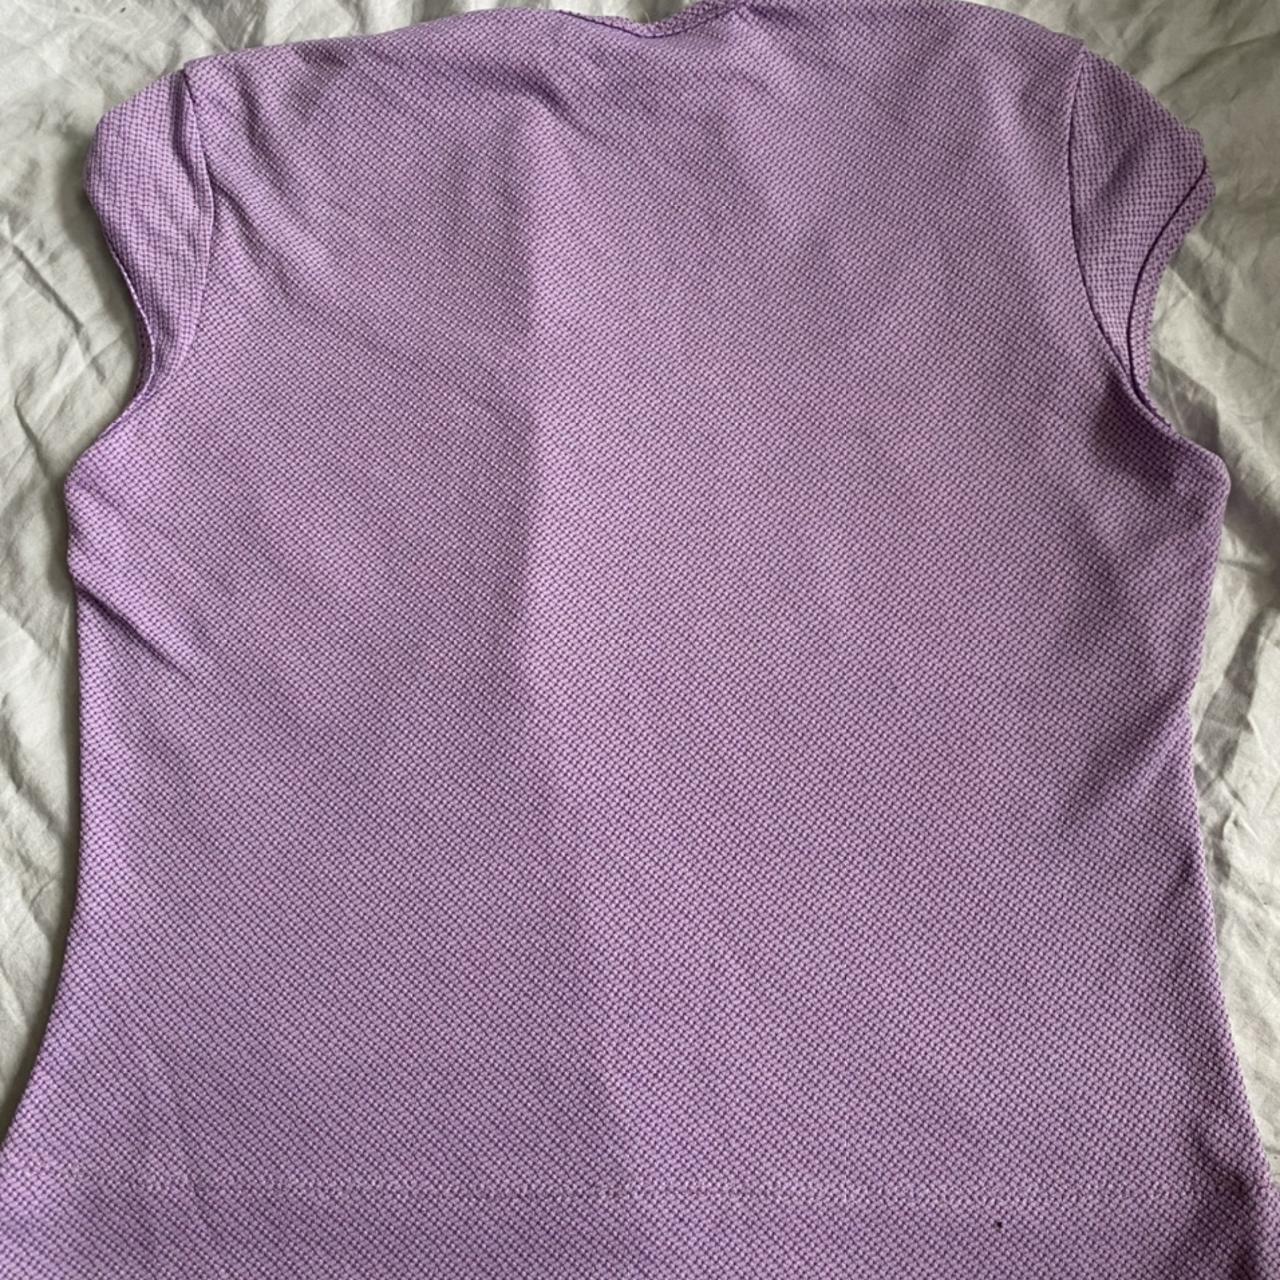 Women's Purple and White Blouse (2)